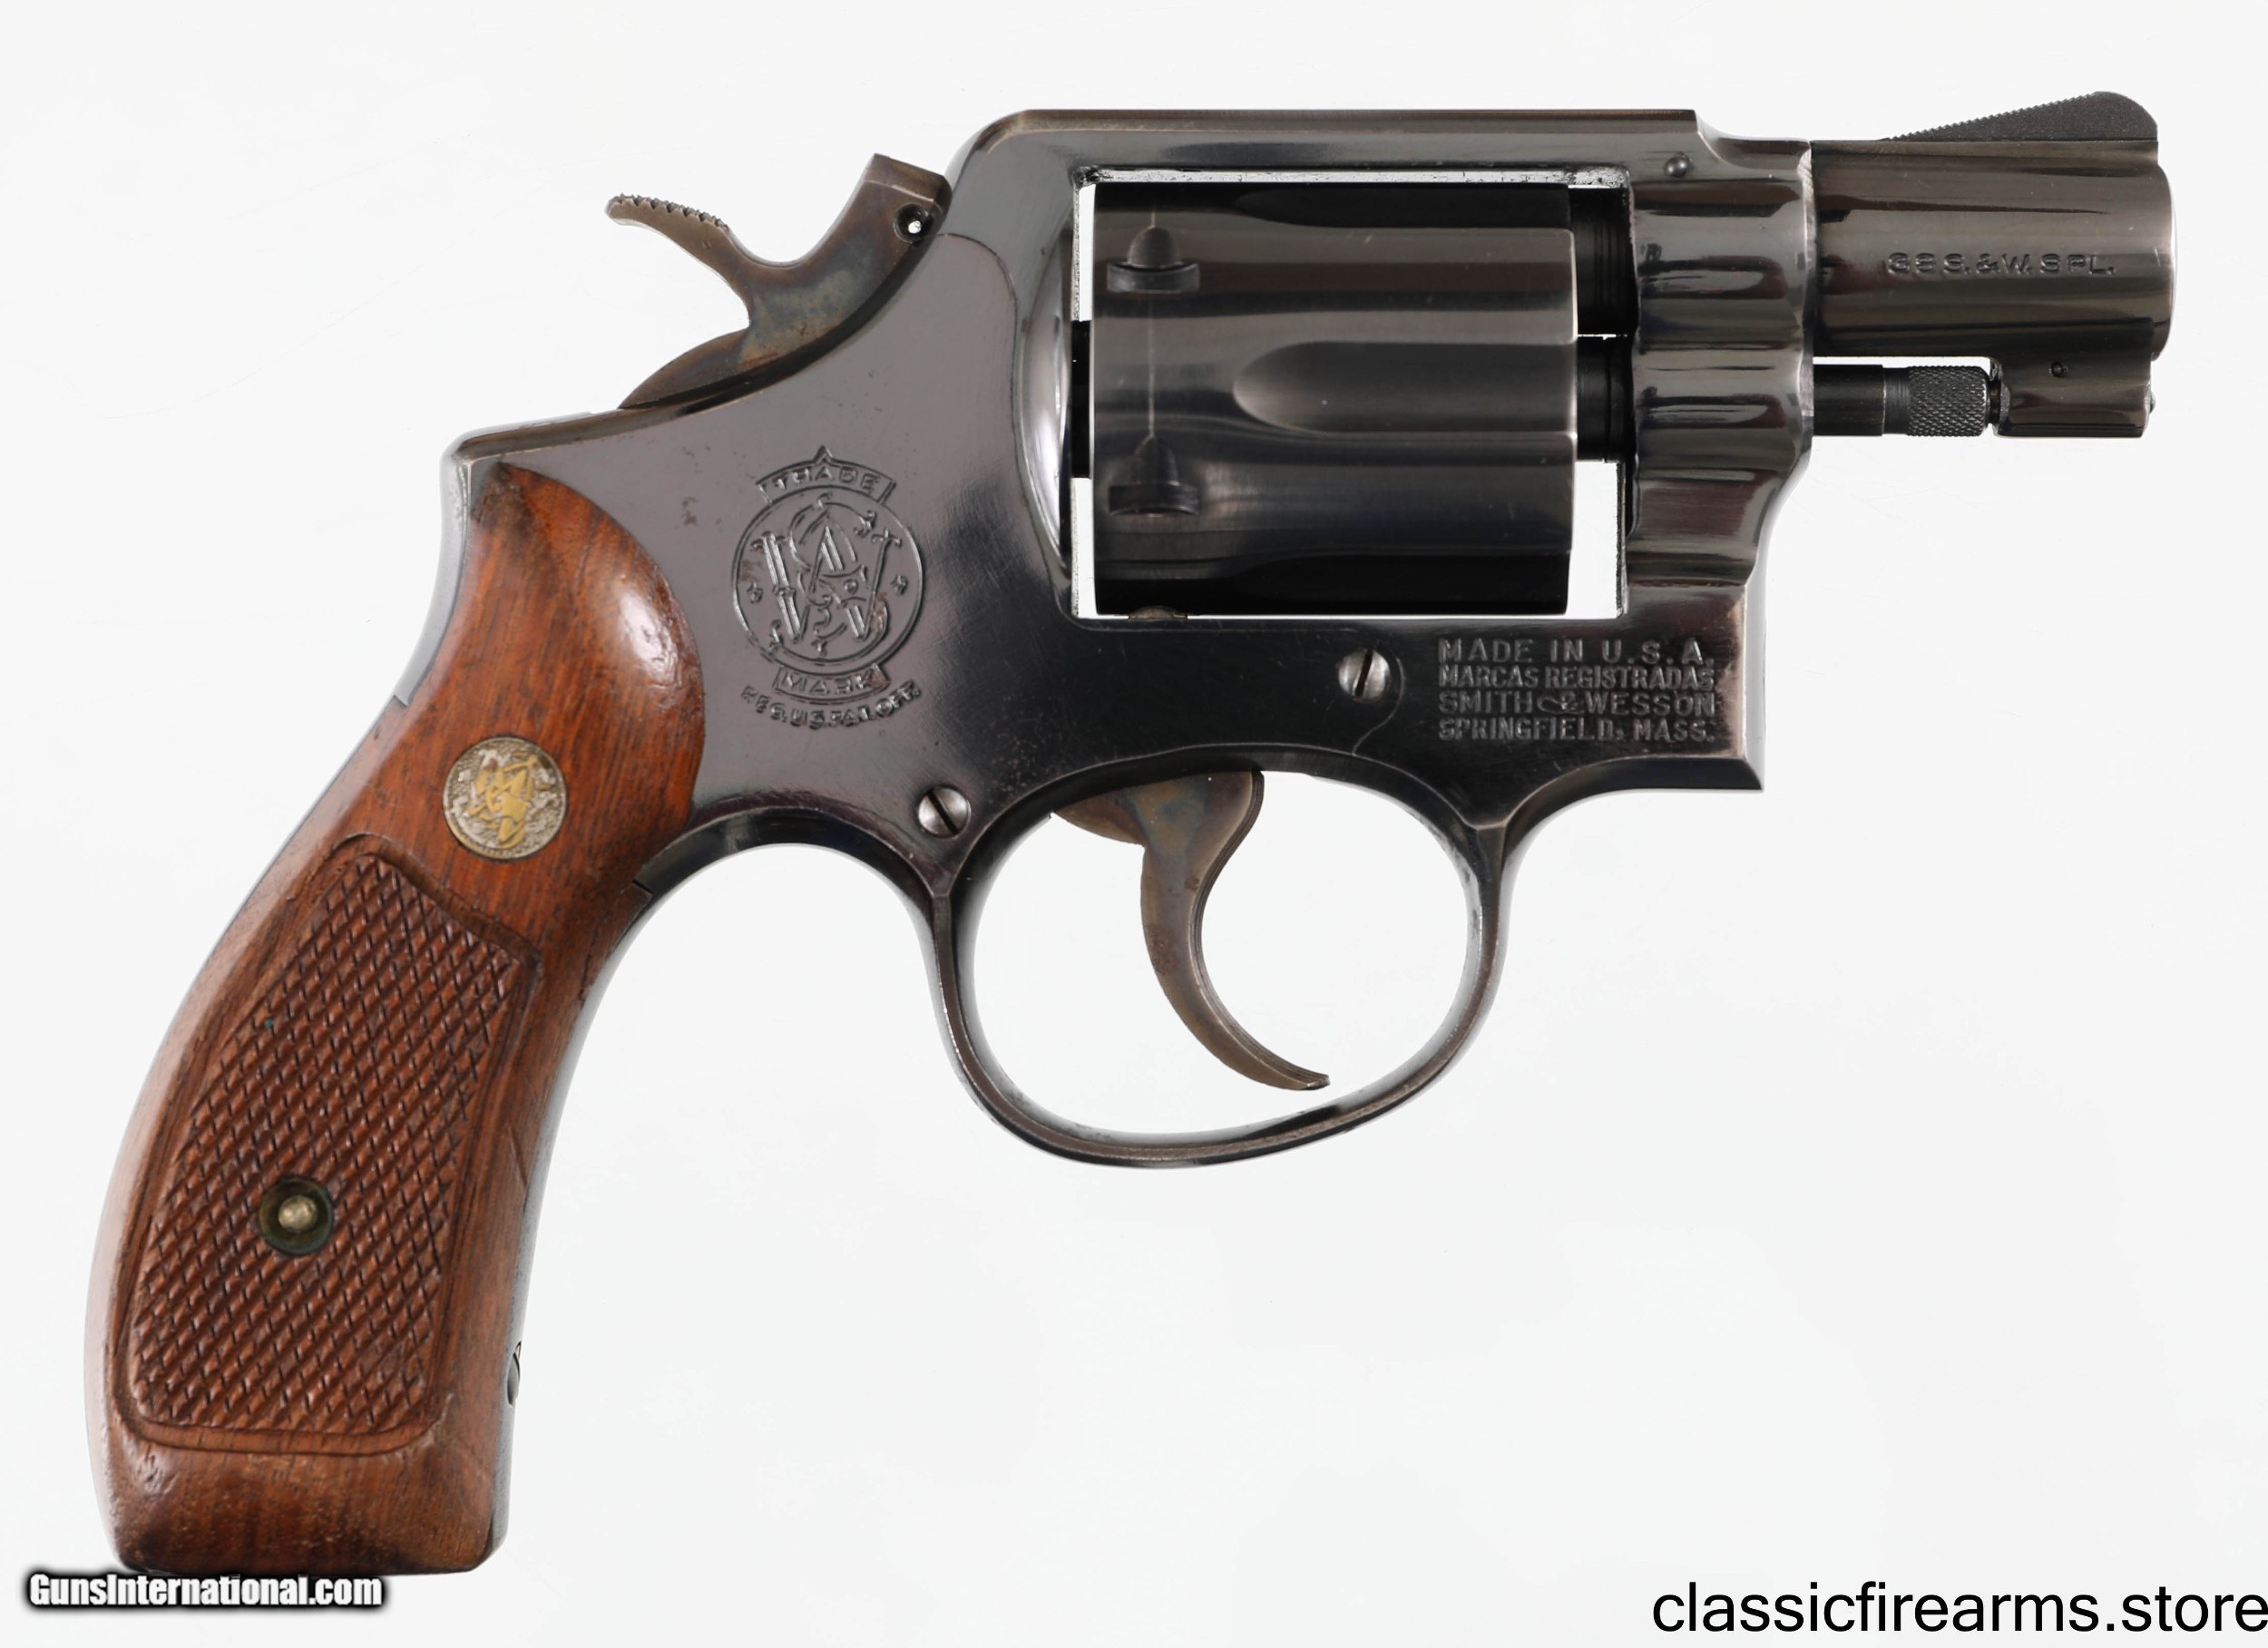 Smith And Wesson Model 10 5 38 Special Revolver 1968 Year Model Low Serial Number